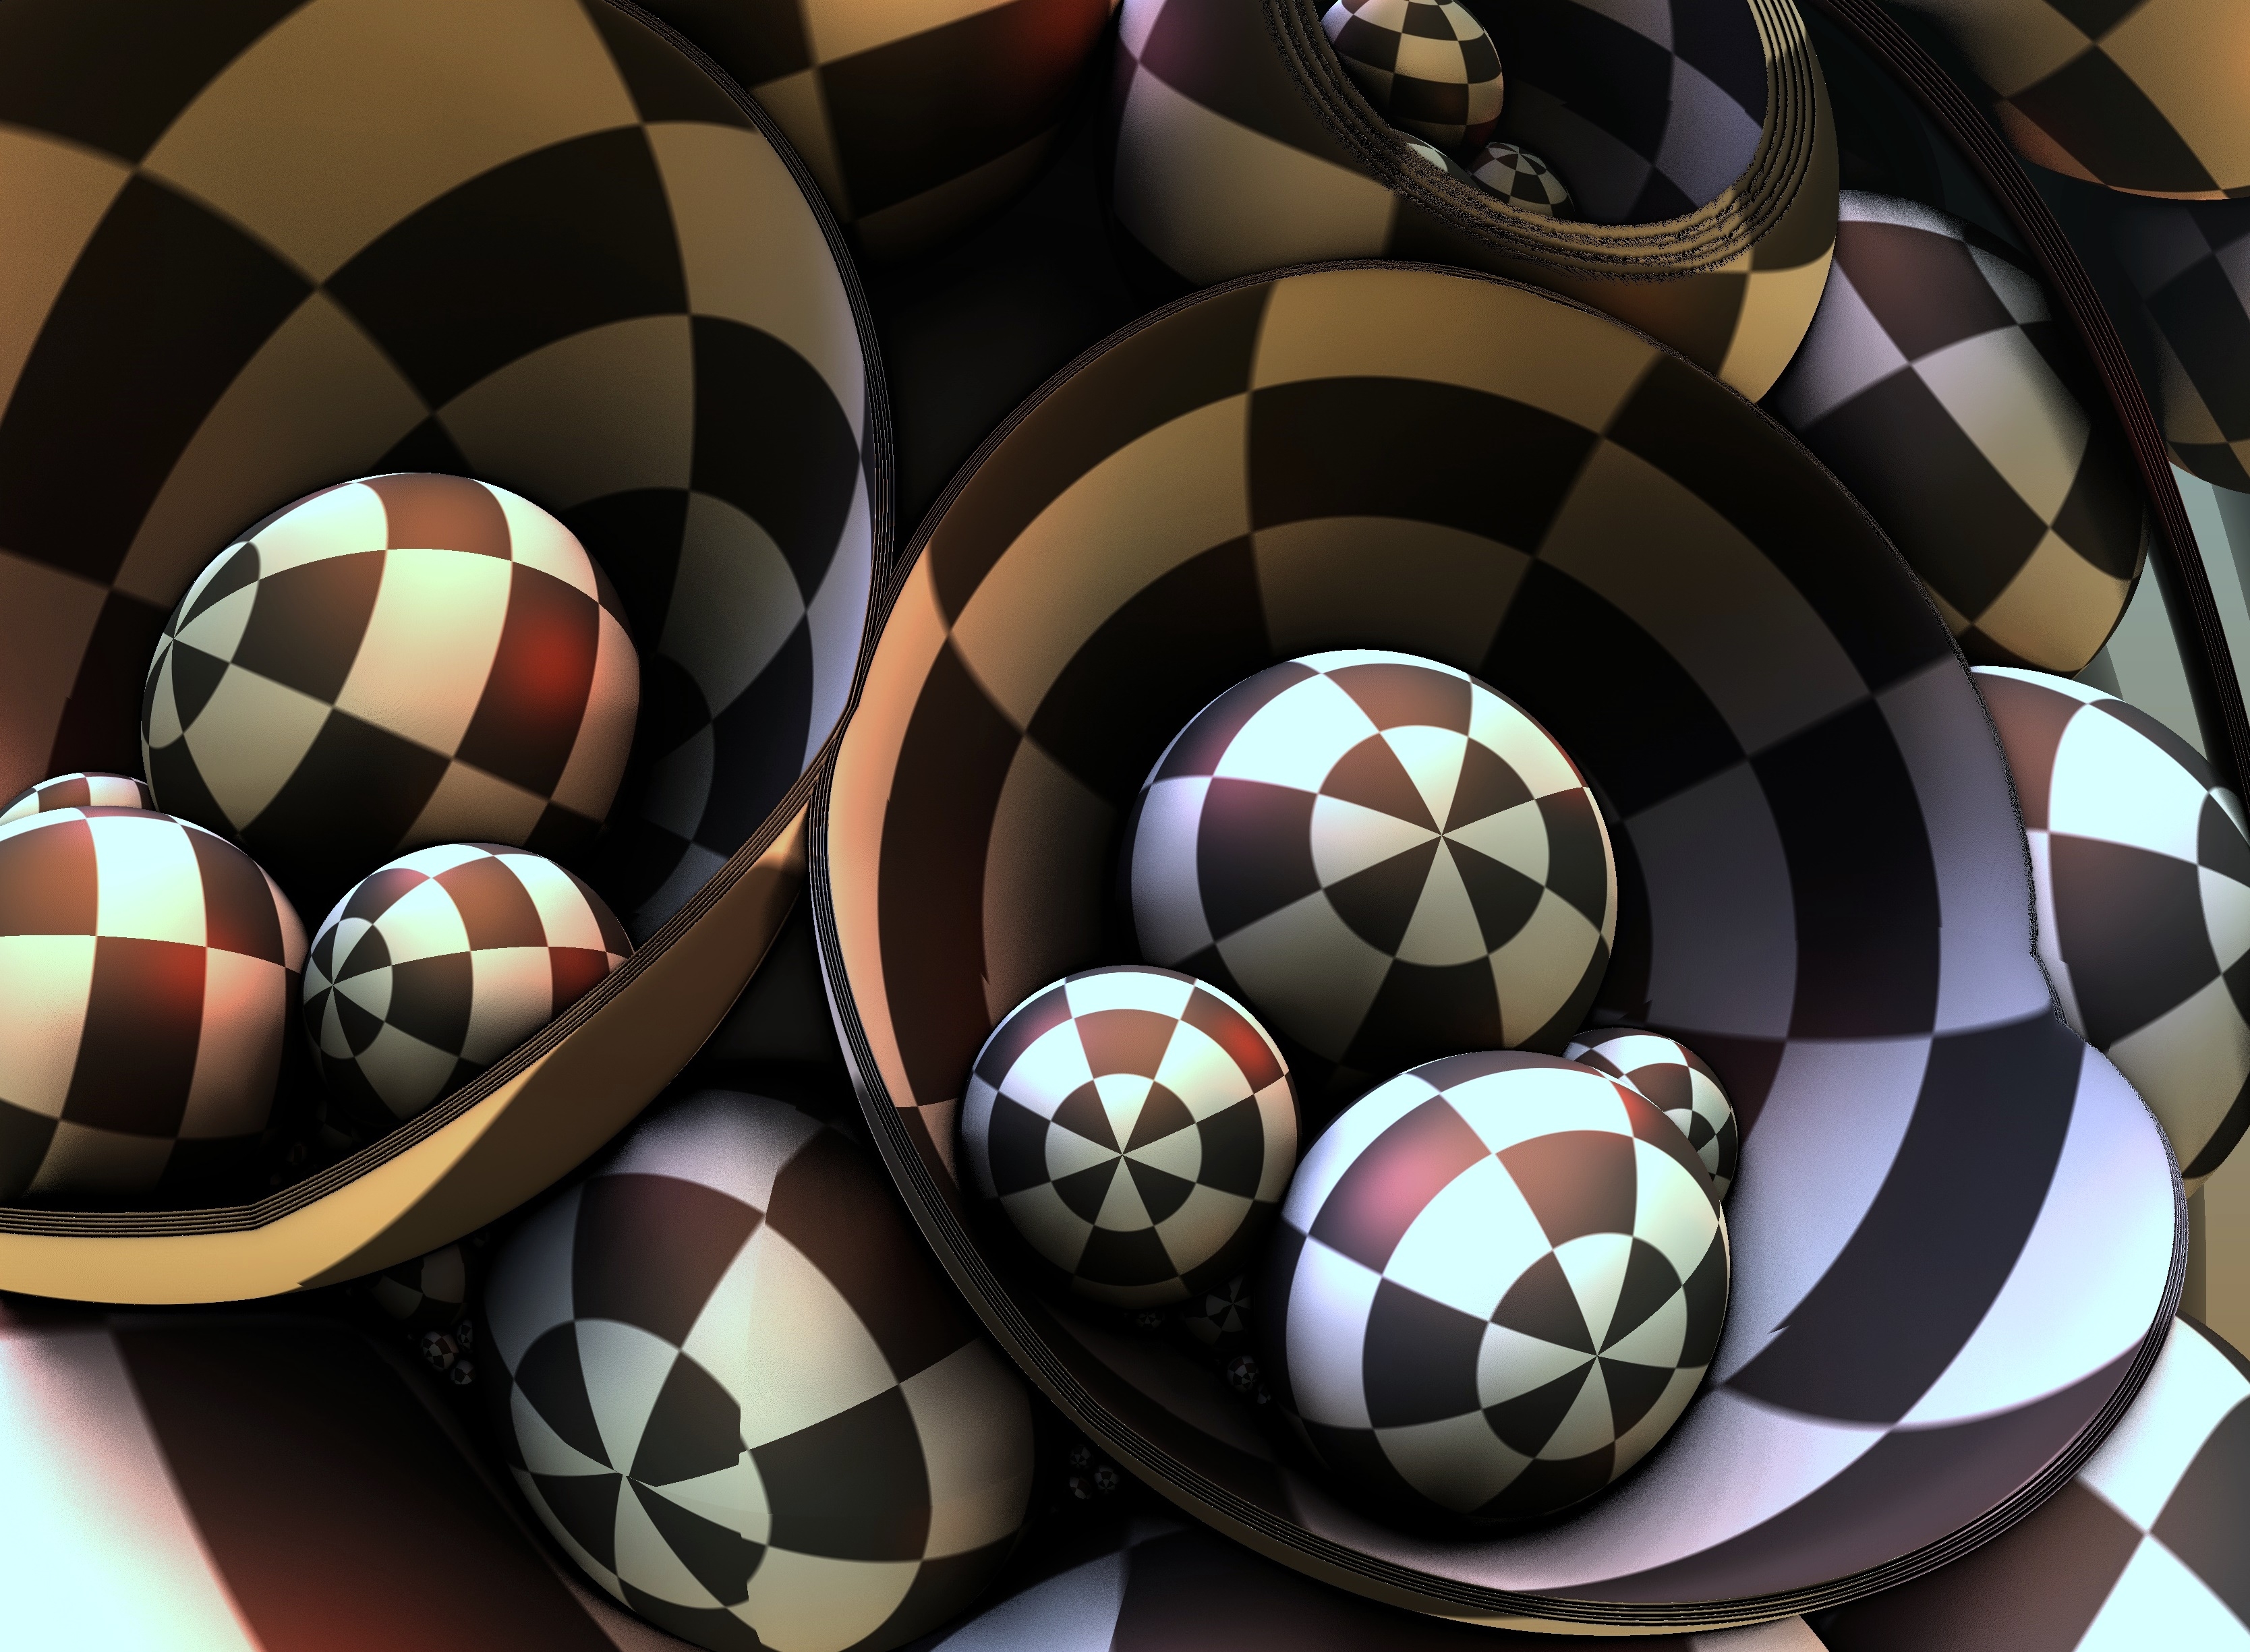 103851 2560x1080 PC pictures for free, download immersion, form, balls, 3d 2560x1080 wallpapers on your desktop